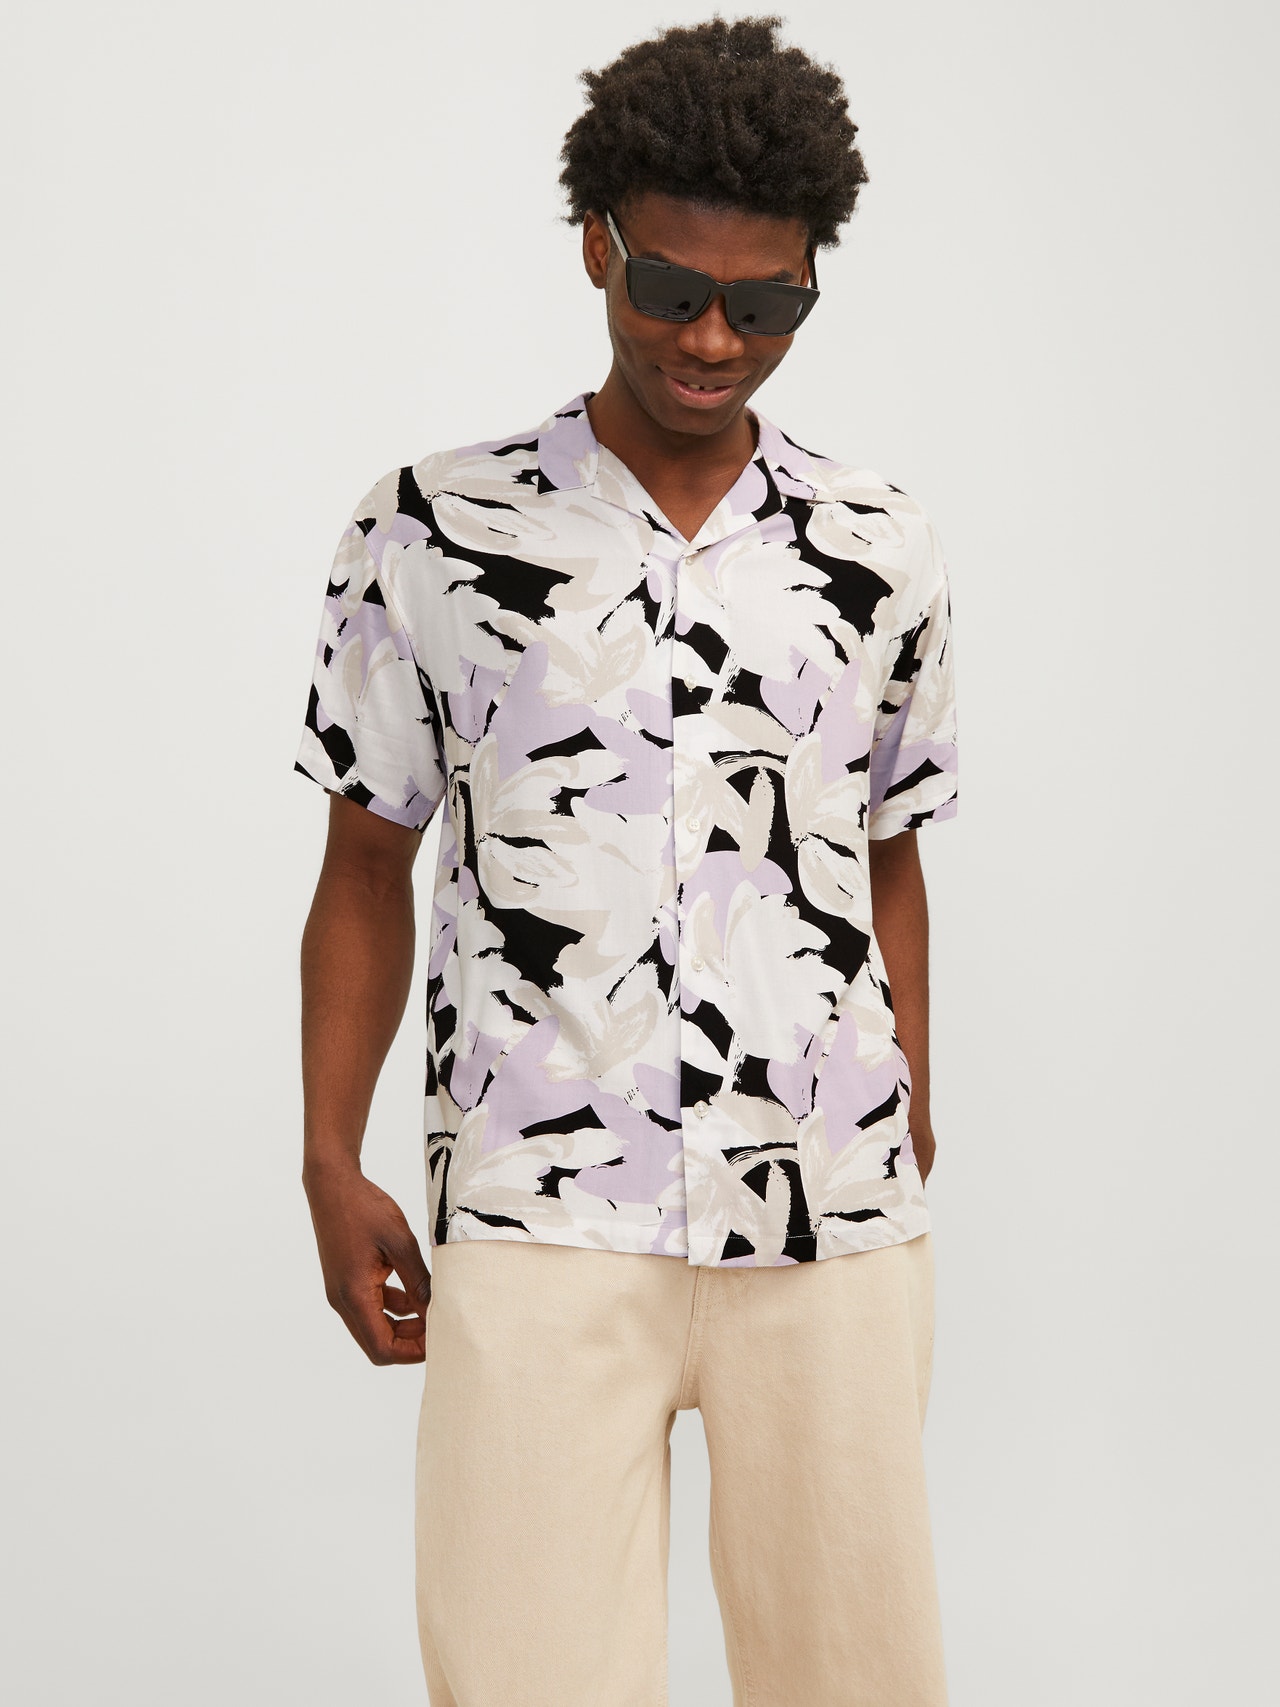 Jack & Jones Stile Hawaiano Relaxed Fit -Lavender Frost - 12255197